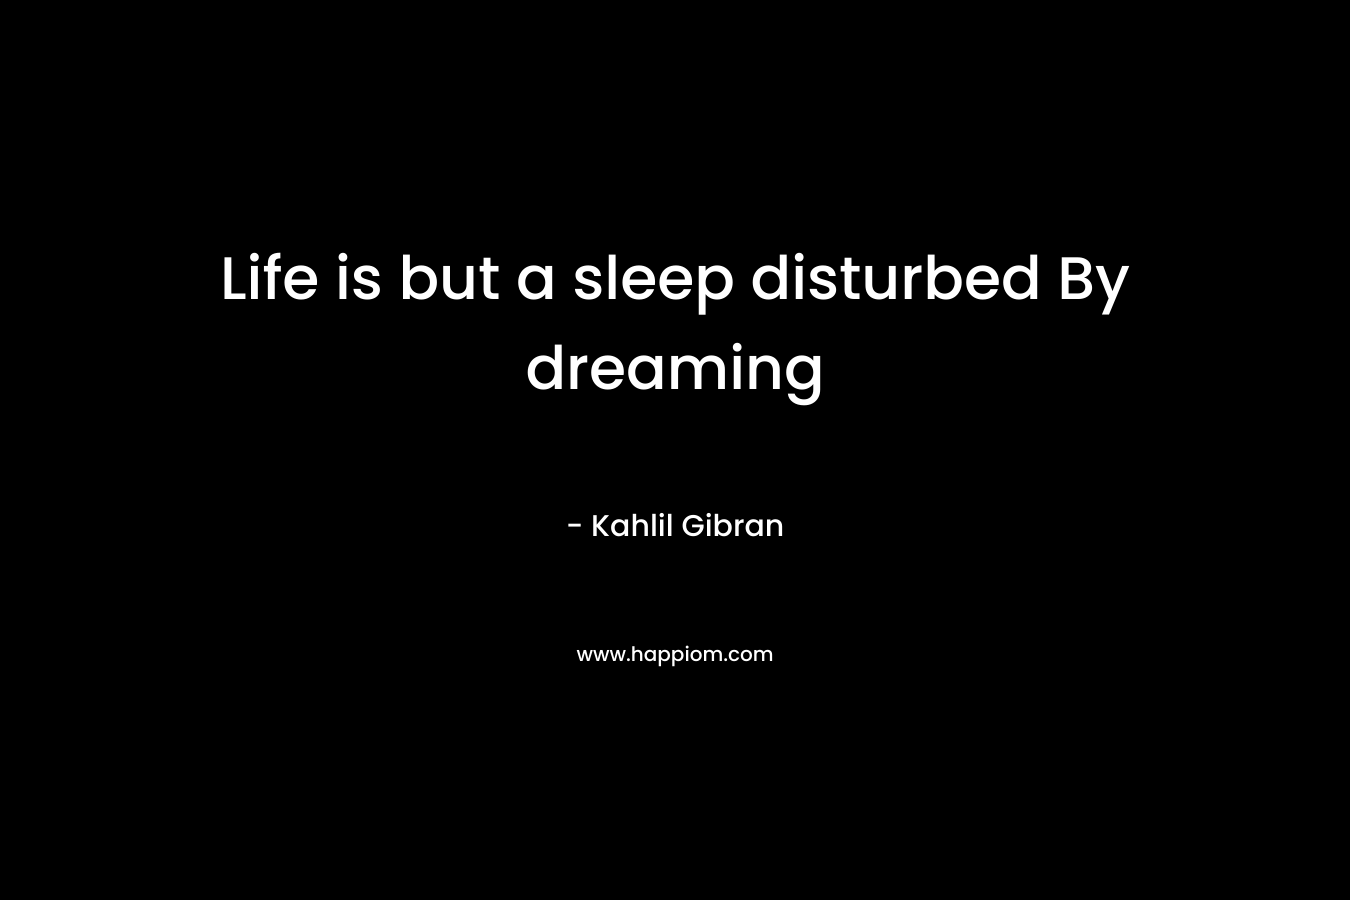 Life is but a sleep disturbed By dreaming – Kahlil Gibran